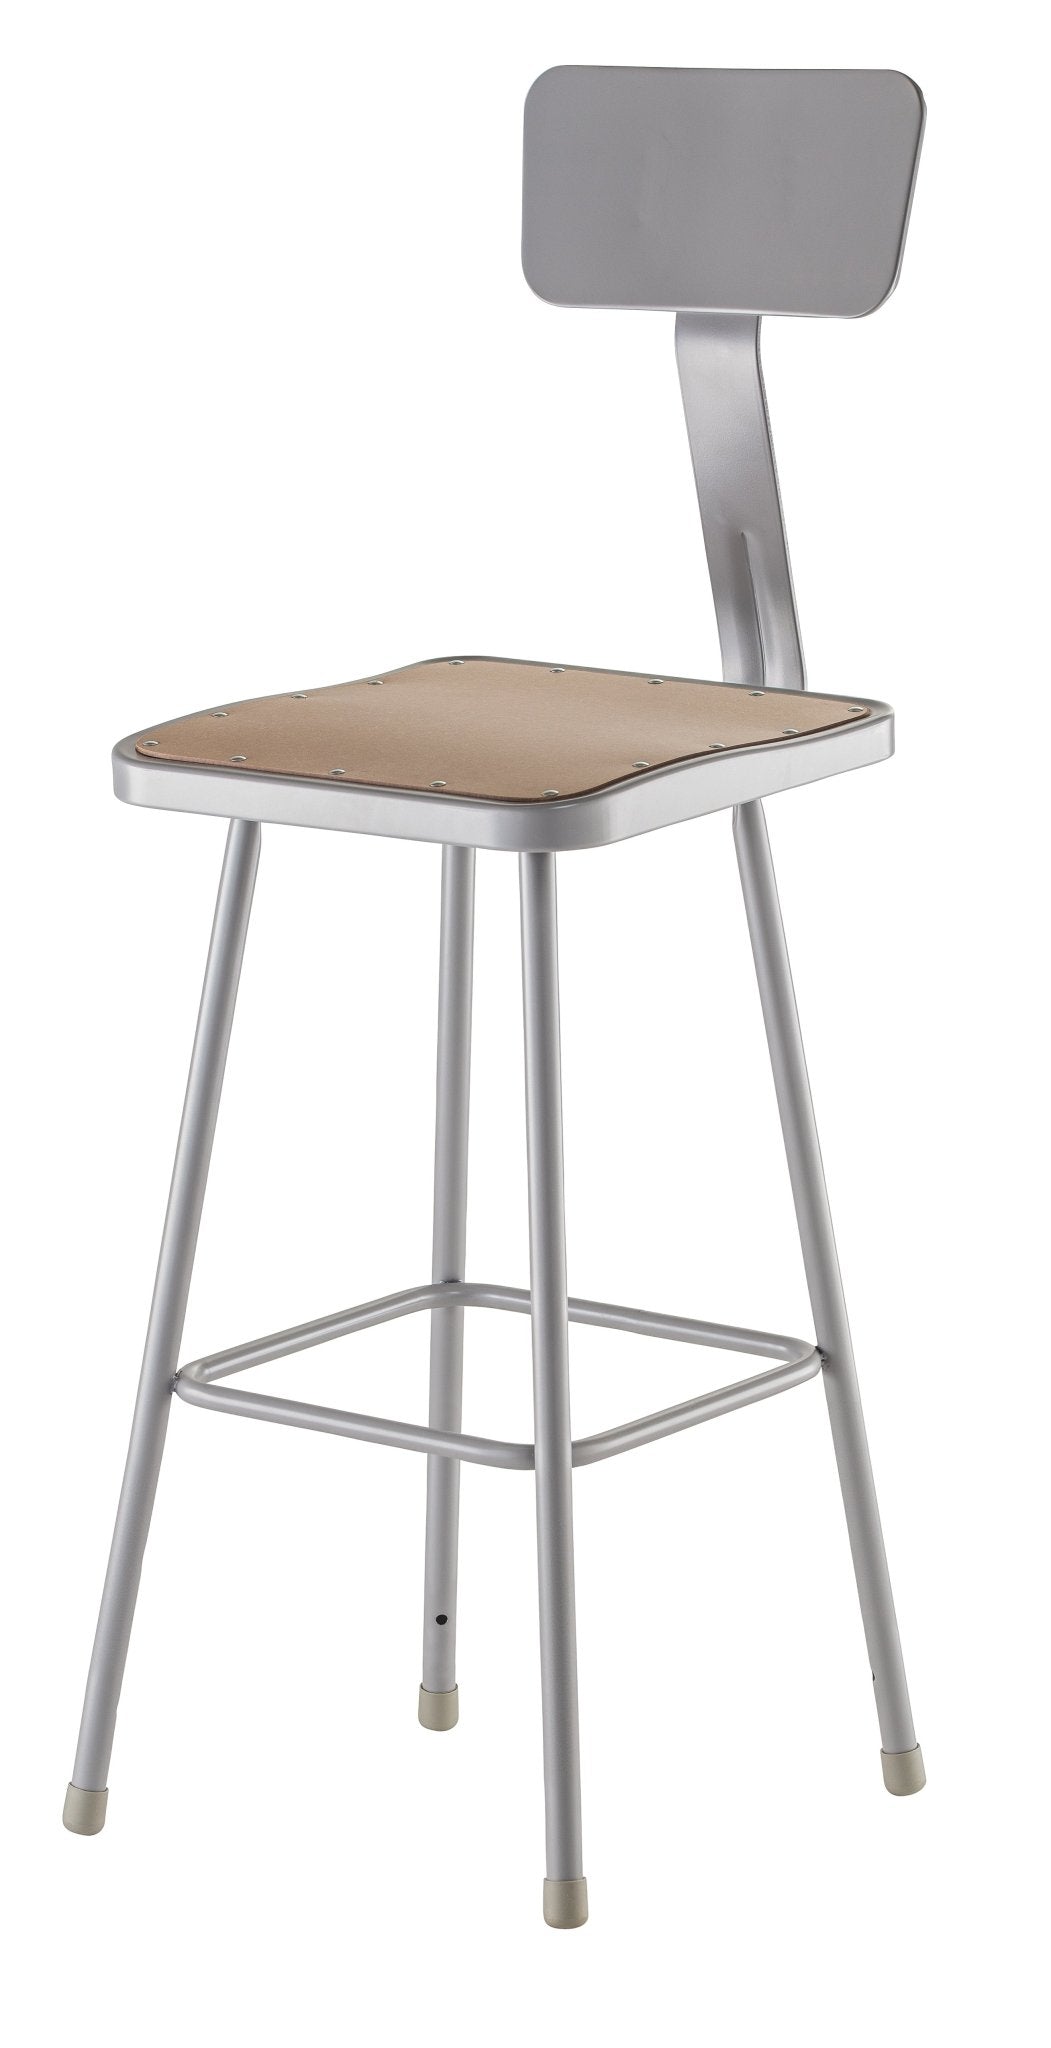 NPS 30" H Square Stool with Hardboard Seat & Backrest (National Public Seating NPS-6330B) - SchoolOutlet